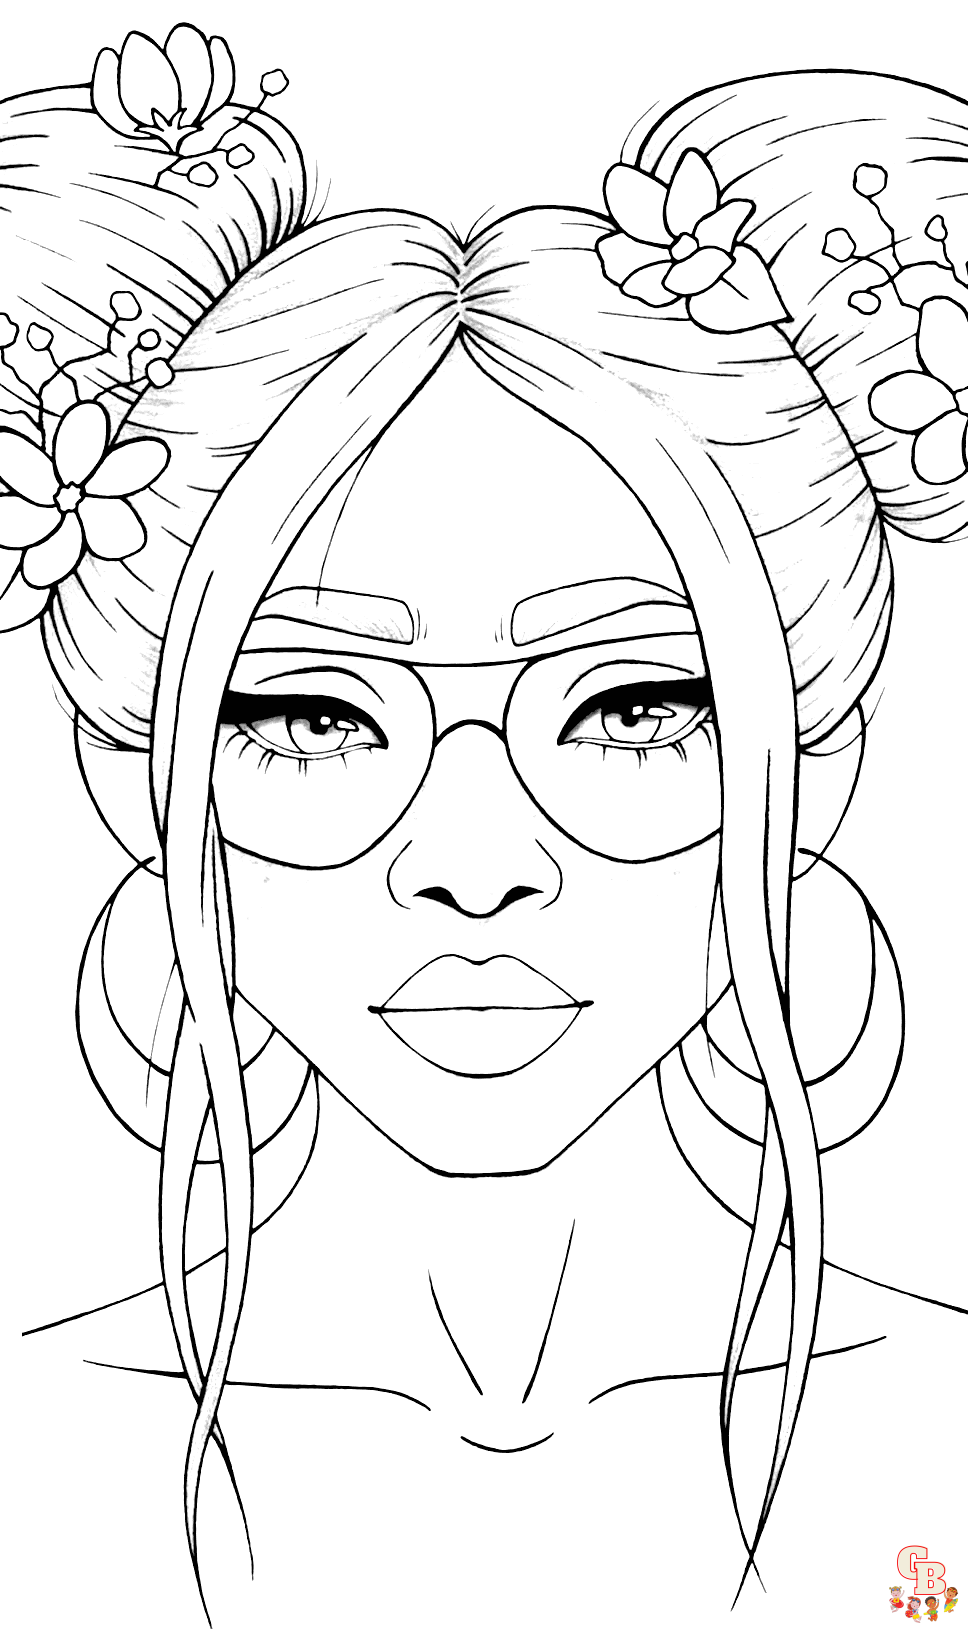 People Coloring Pages: Discover the Joy of Coloring Characters